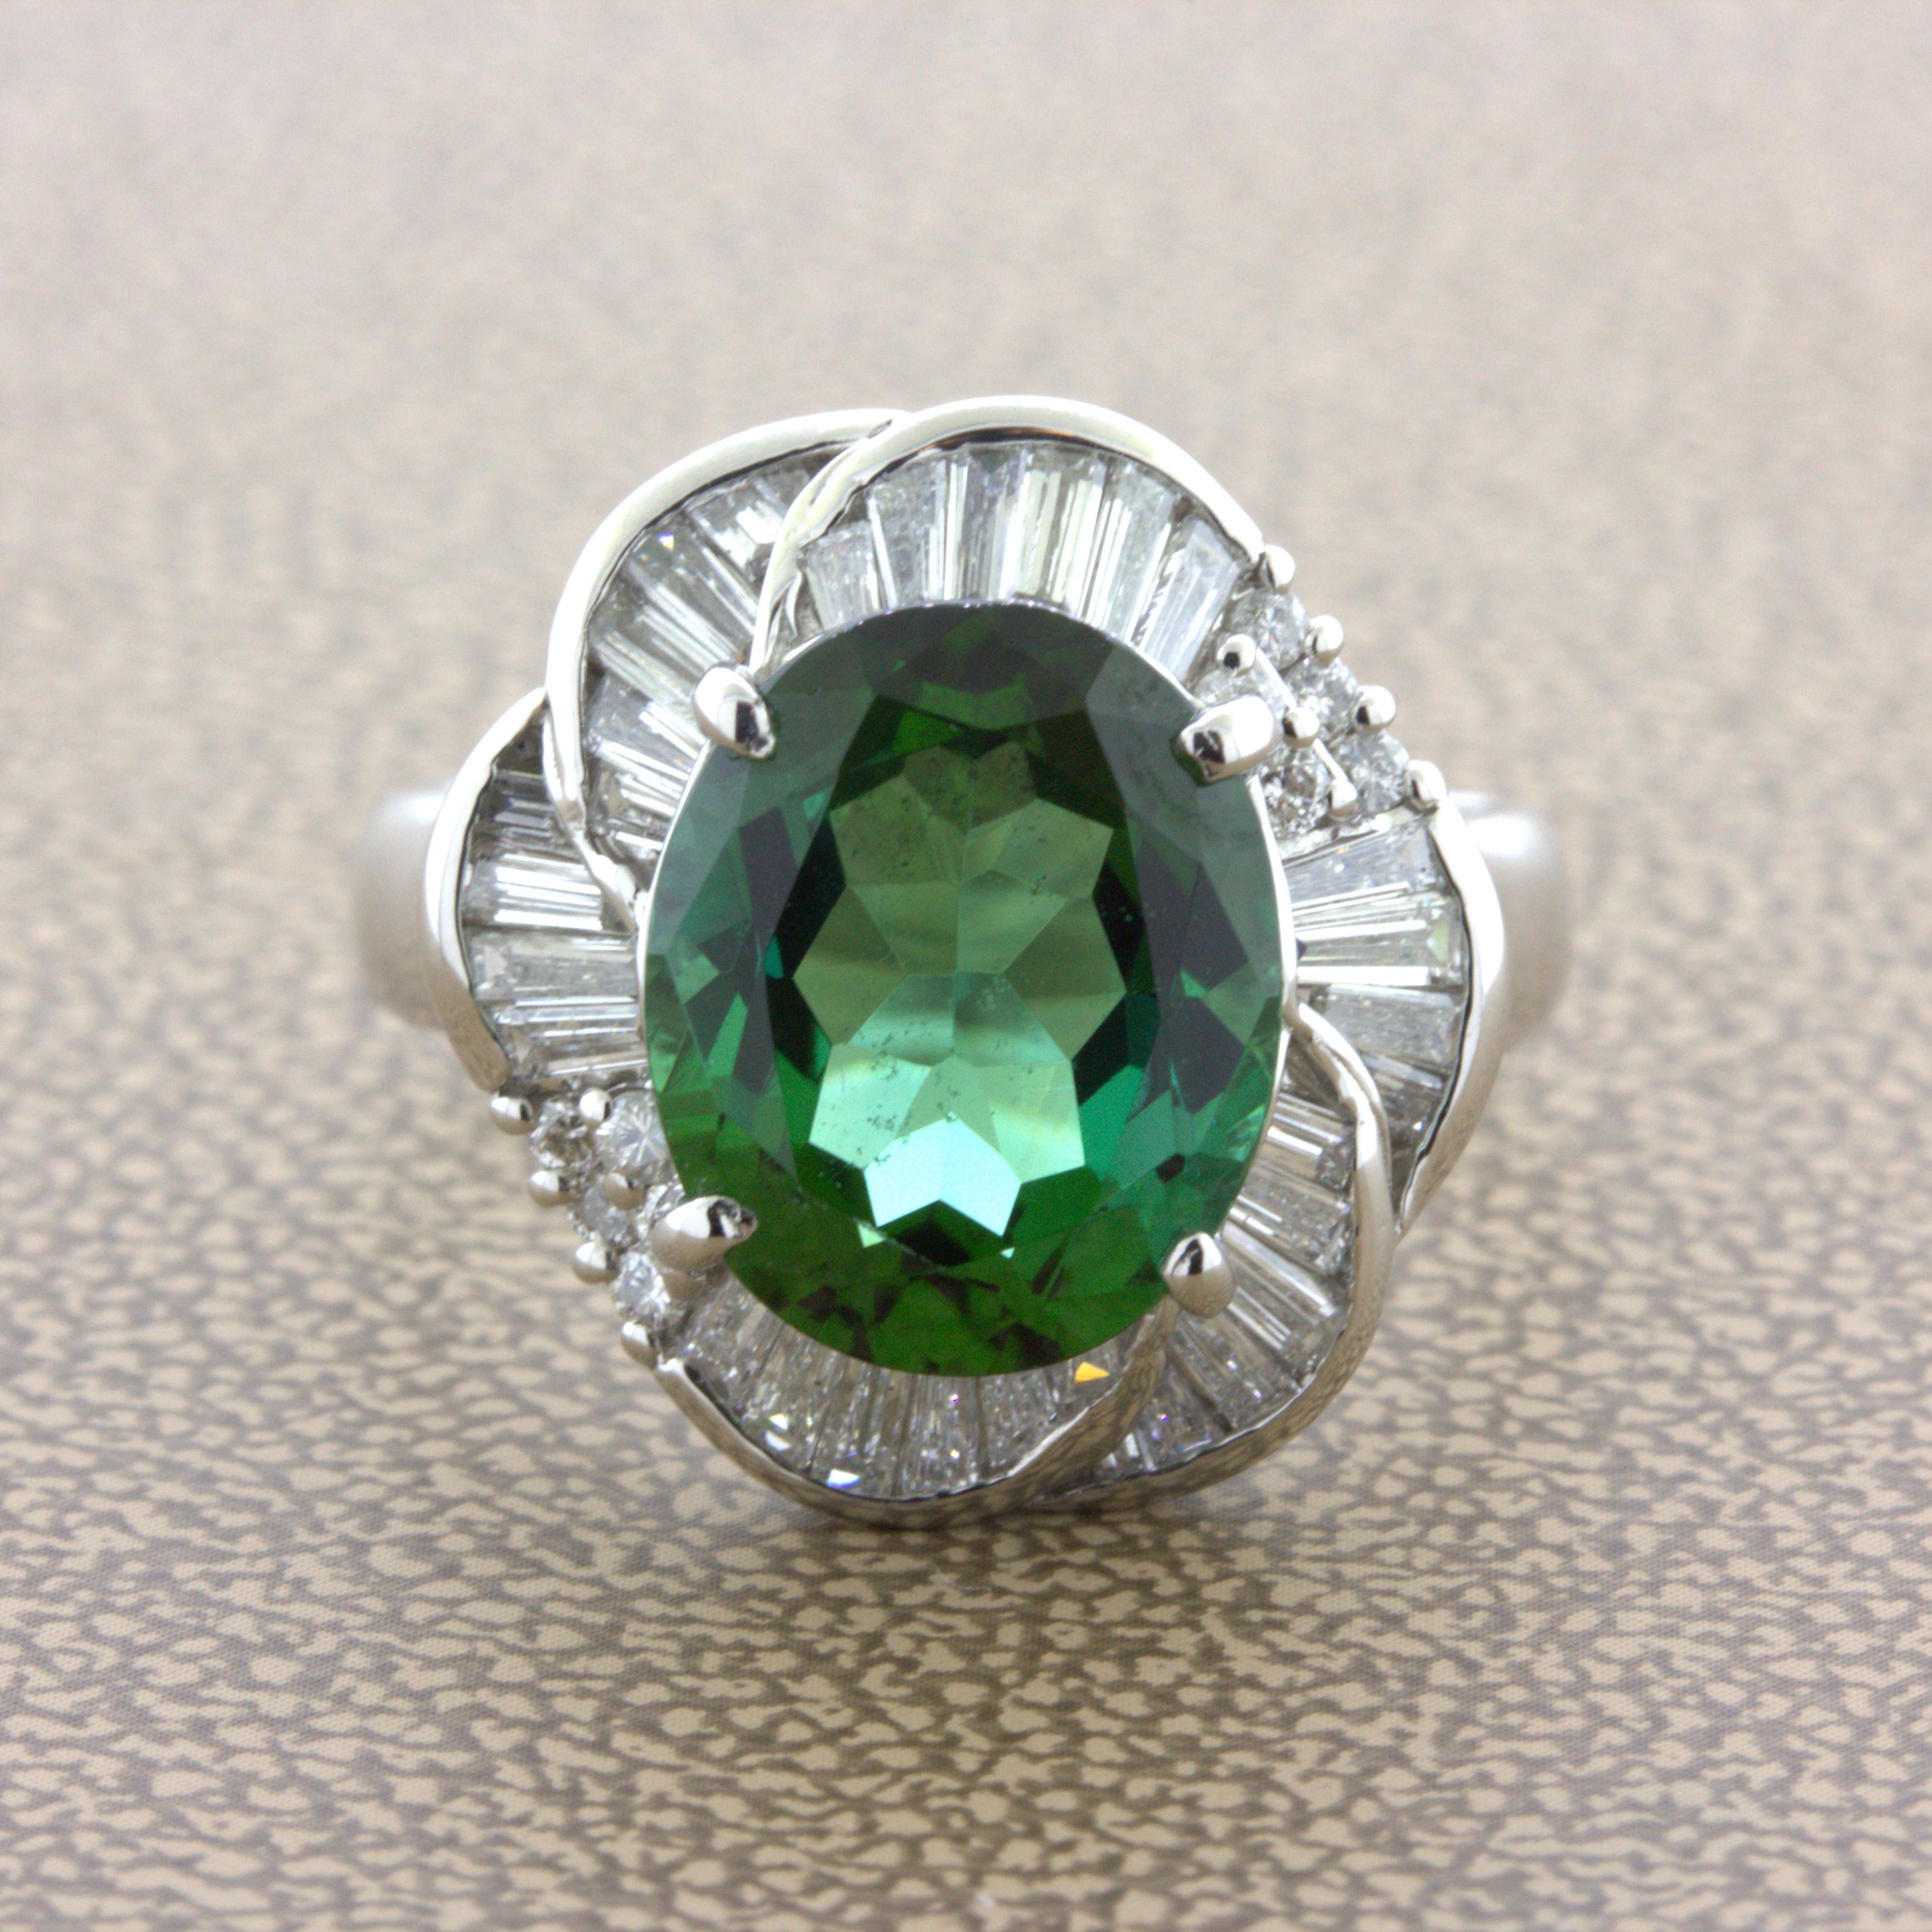 A fine gem quality indicolite tourmaline takes center stage of this diamond platinum ring. It weighs 4.95 carats and has a super rich and brilliant blue-green color known as indicolite in the trade. It is complemented by 0.97 carats of round